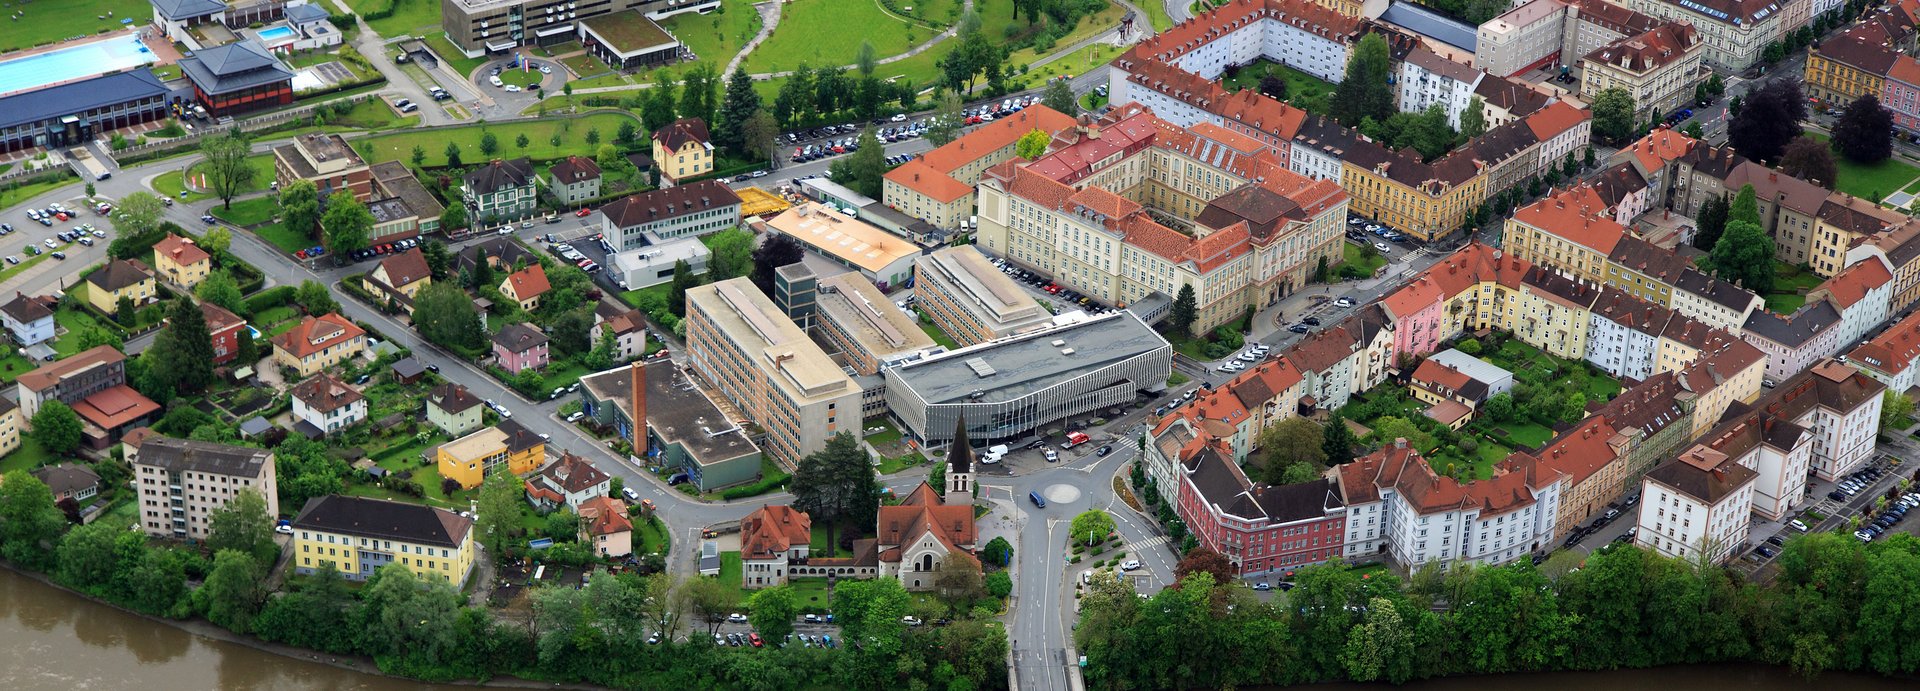 A bird's eye view of the city of Leoben with buildings of the Montanuniversität.